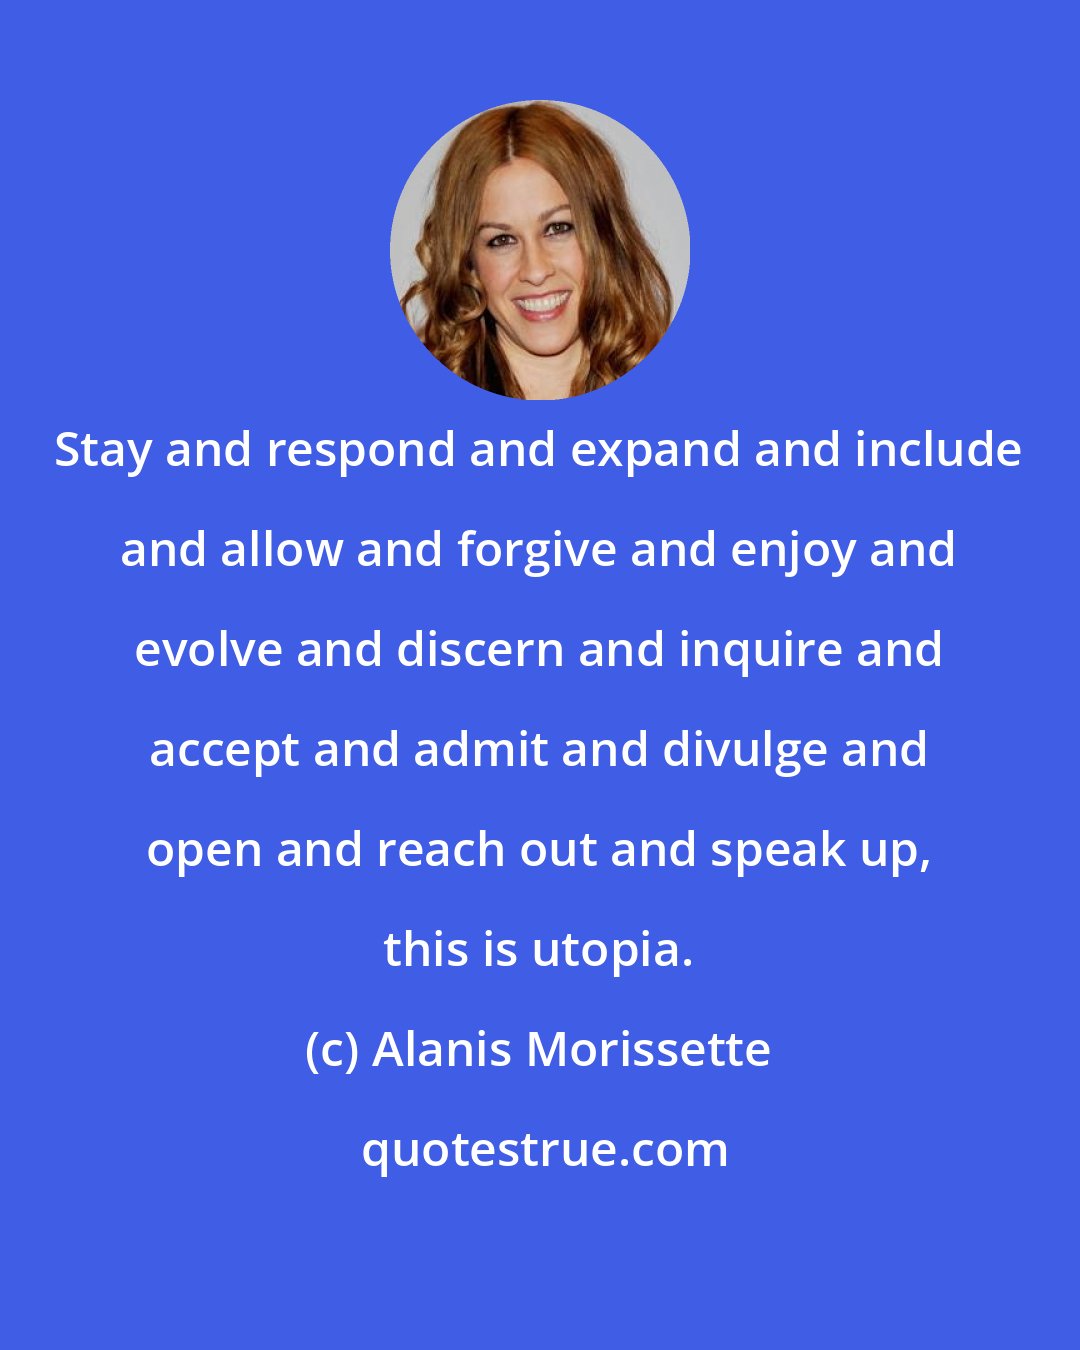 Alanis Morissette: Stay and respond and expand and include and allow and forgive and enjoy and evolve and discern and inquire and accept and admit and divulge and open and reach out and speak up, this is utopia.